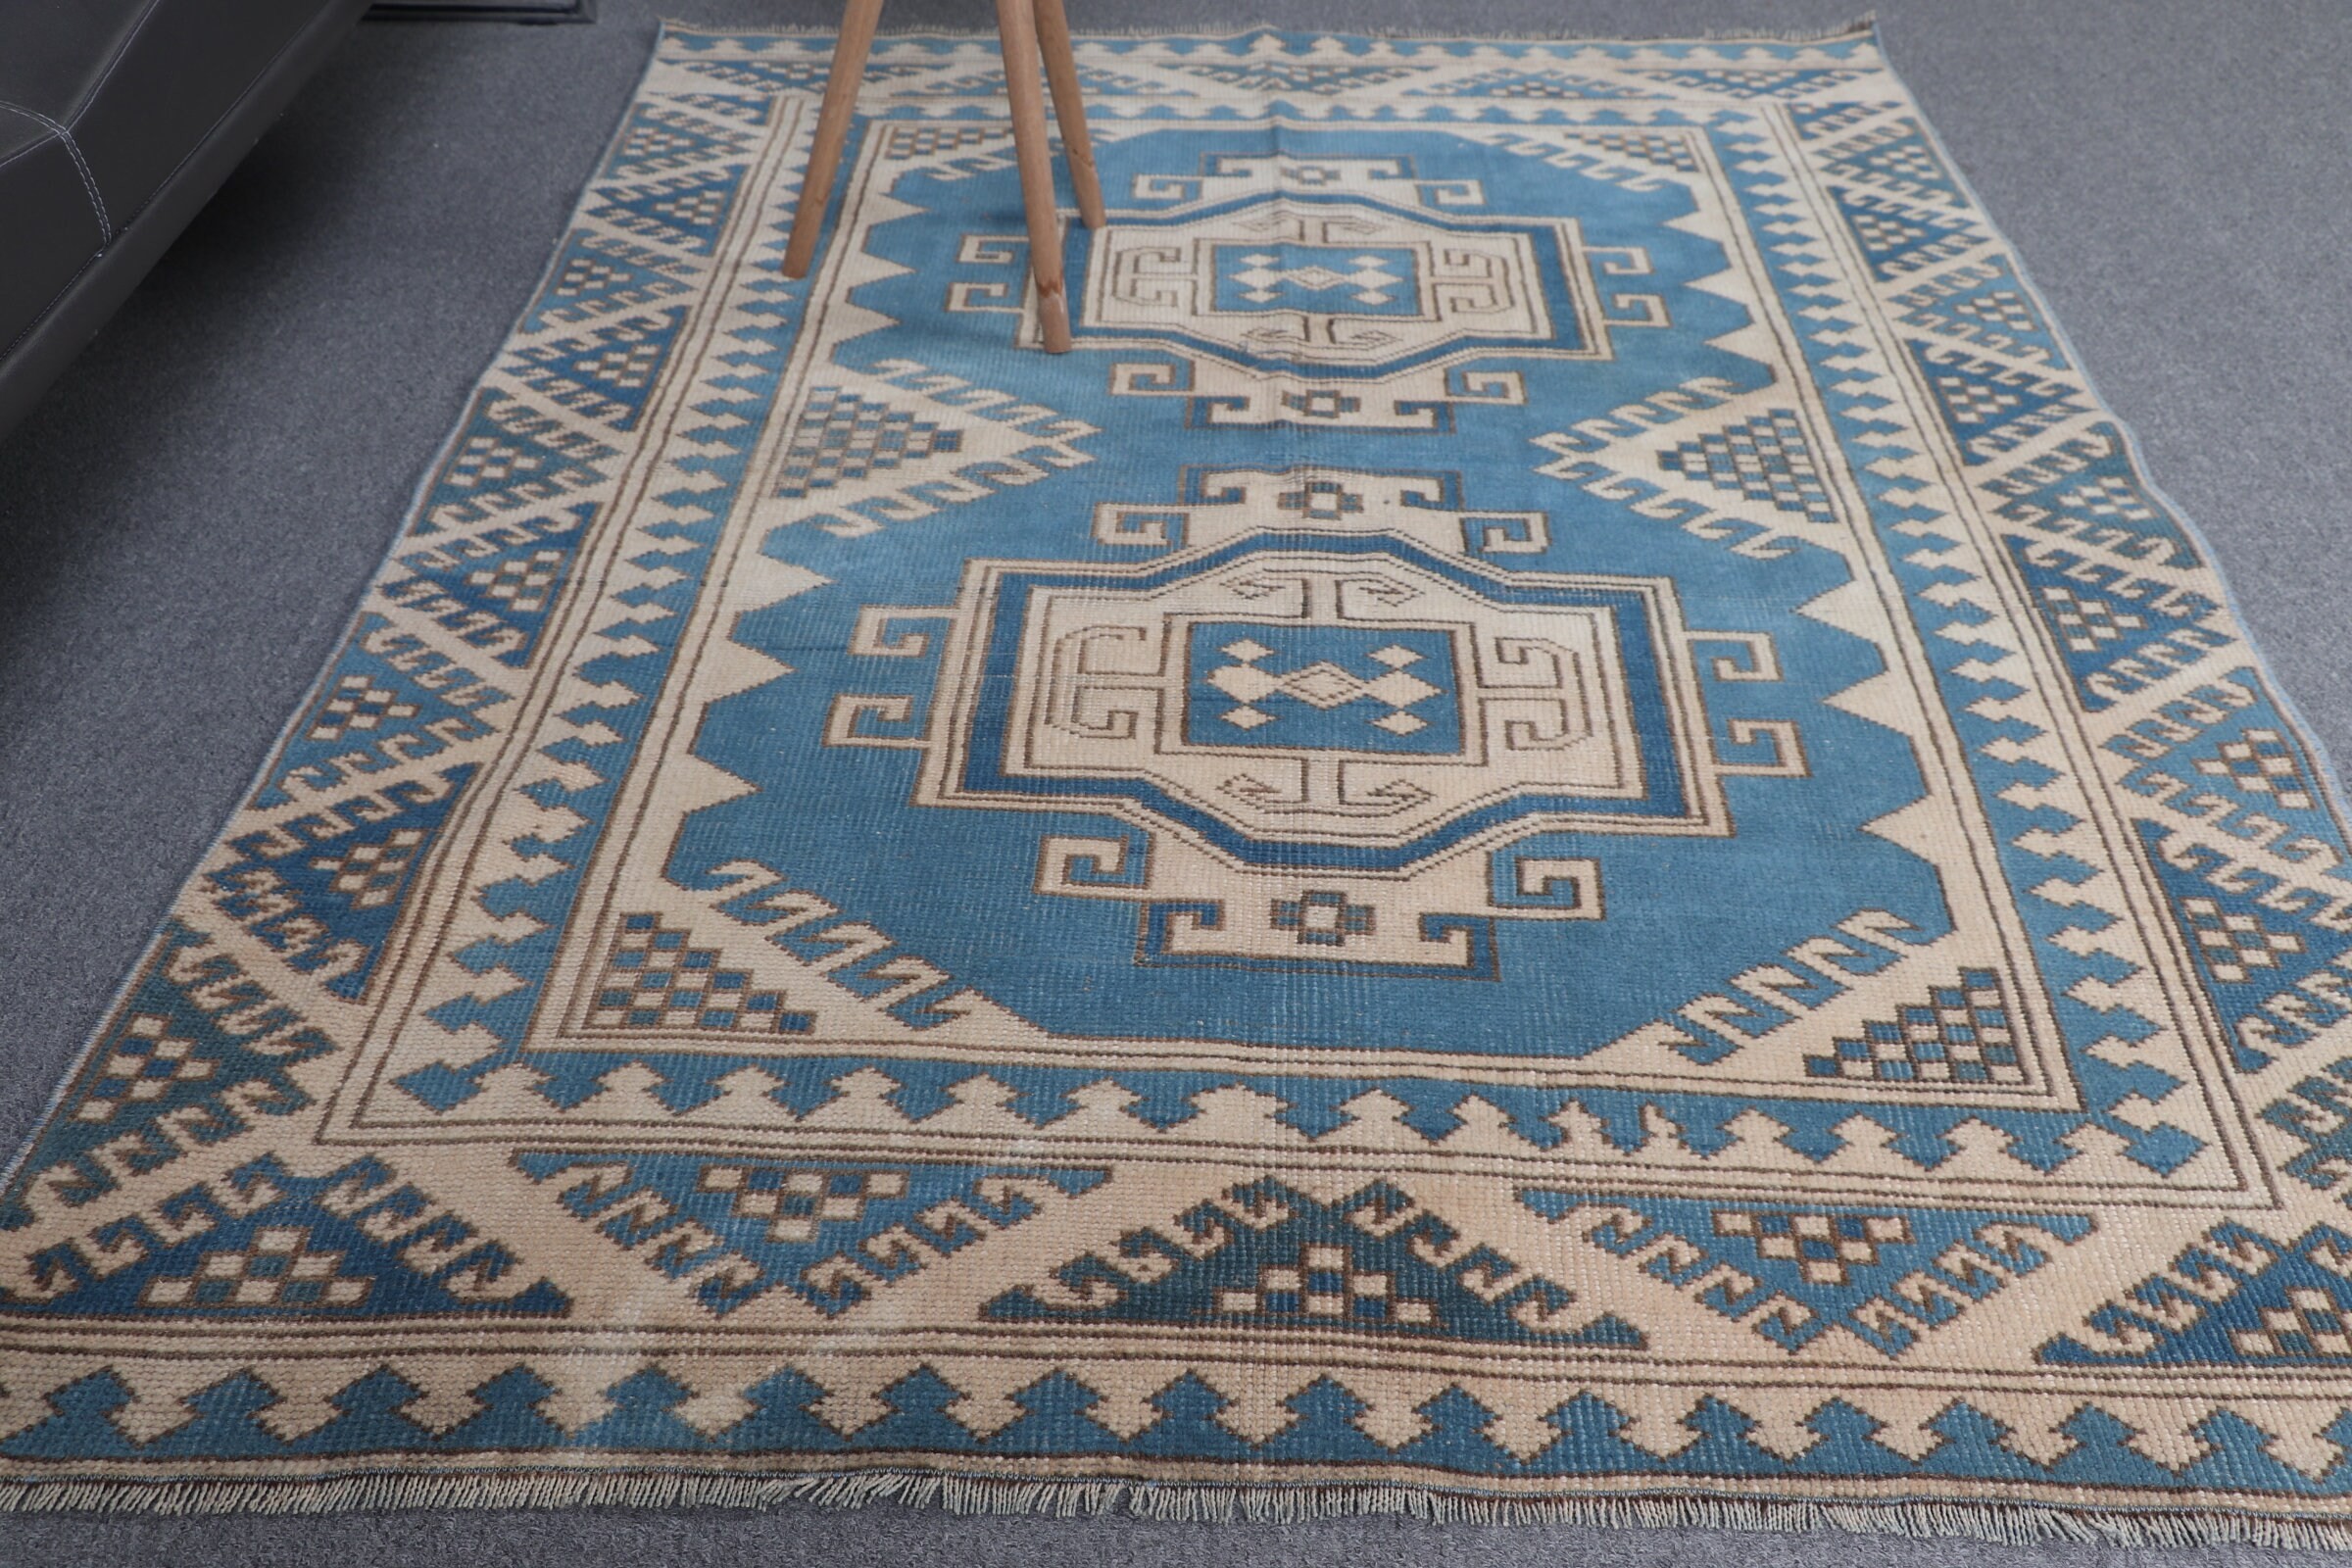 Blue Cool Rug, Kitchen Rug, Bedroom Rug, Turkish Rugs, Home Decor Rugs, Rugs for Indoor, 4.2x6.5 ft Area Rugs, Aesthetic Rugs, Vintage Rugs